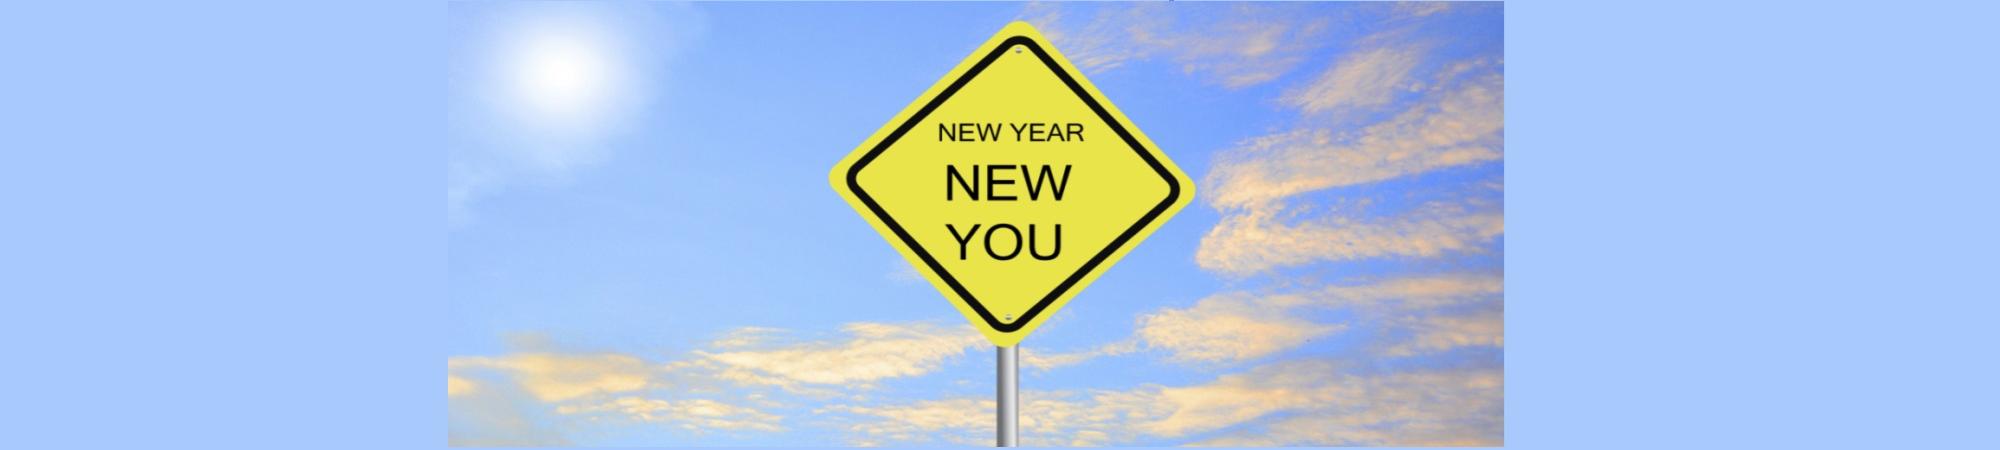 A yellow diamond-shaped traffic sign. Caution its a New Year and a New You. 